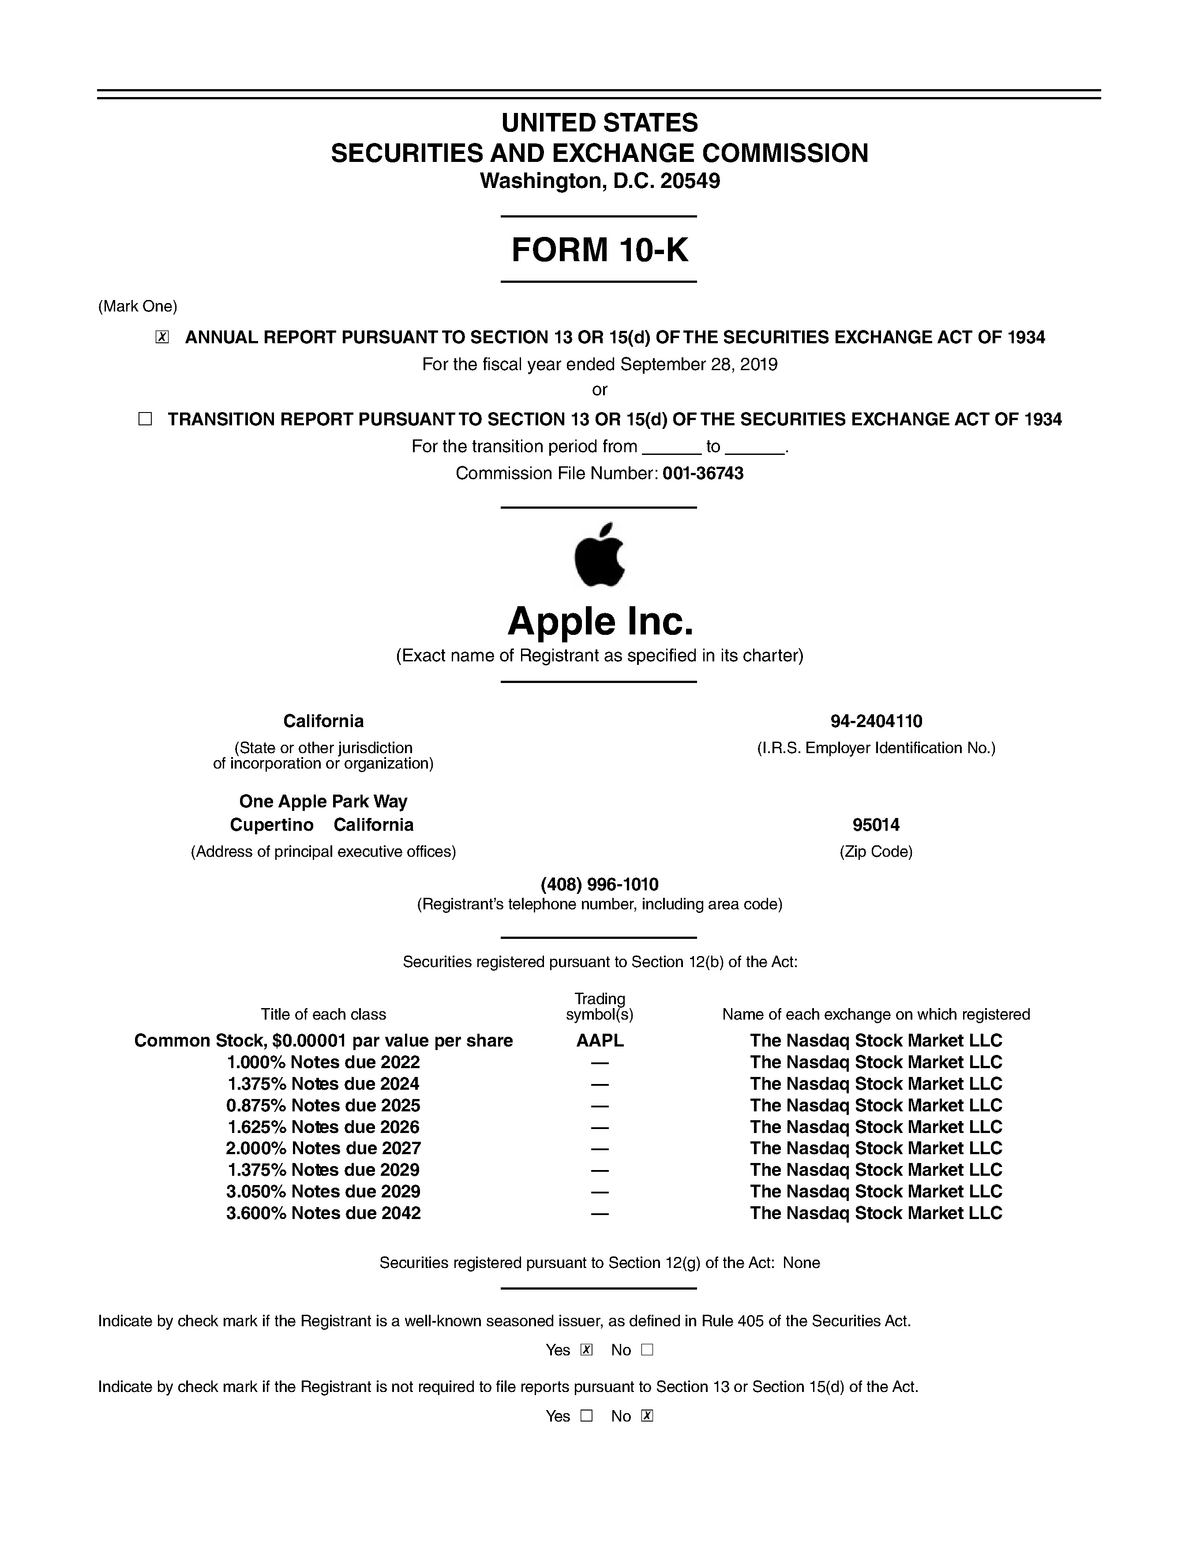 Apple Annual Report 2020 Business UNITED STATES SECURITIES AND